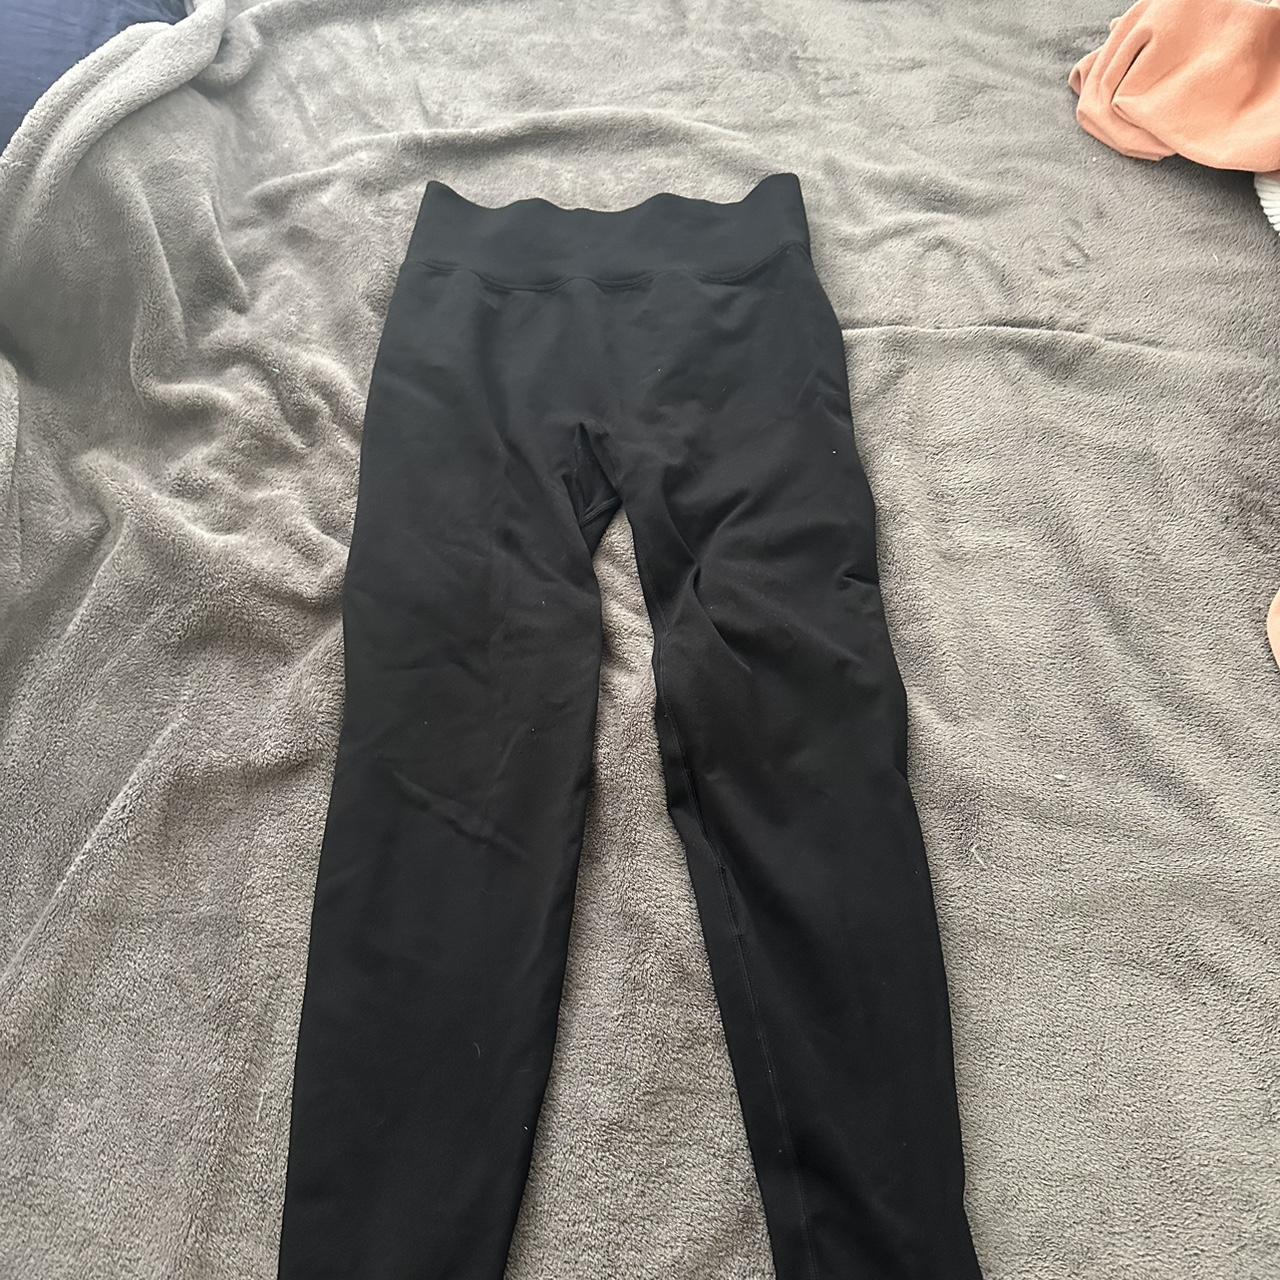 Medium pink leggings that were only used a few times - Depop